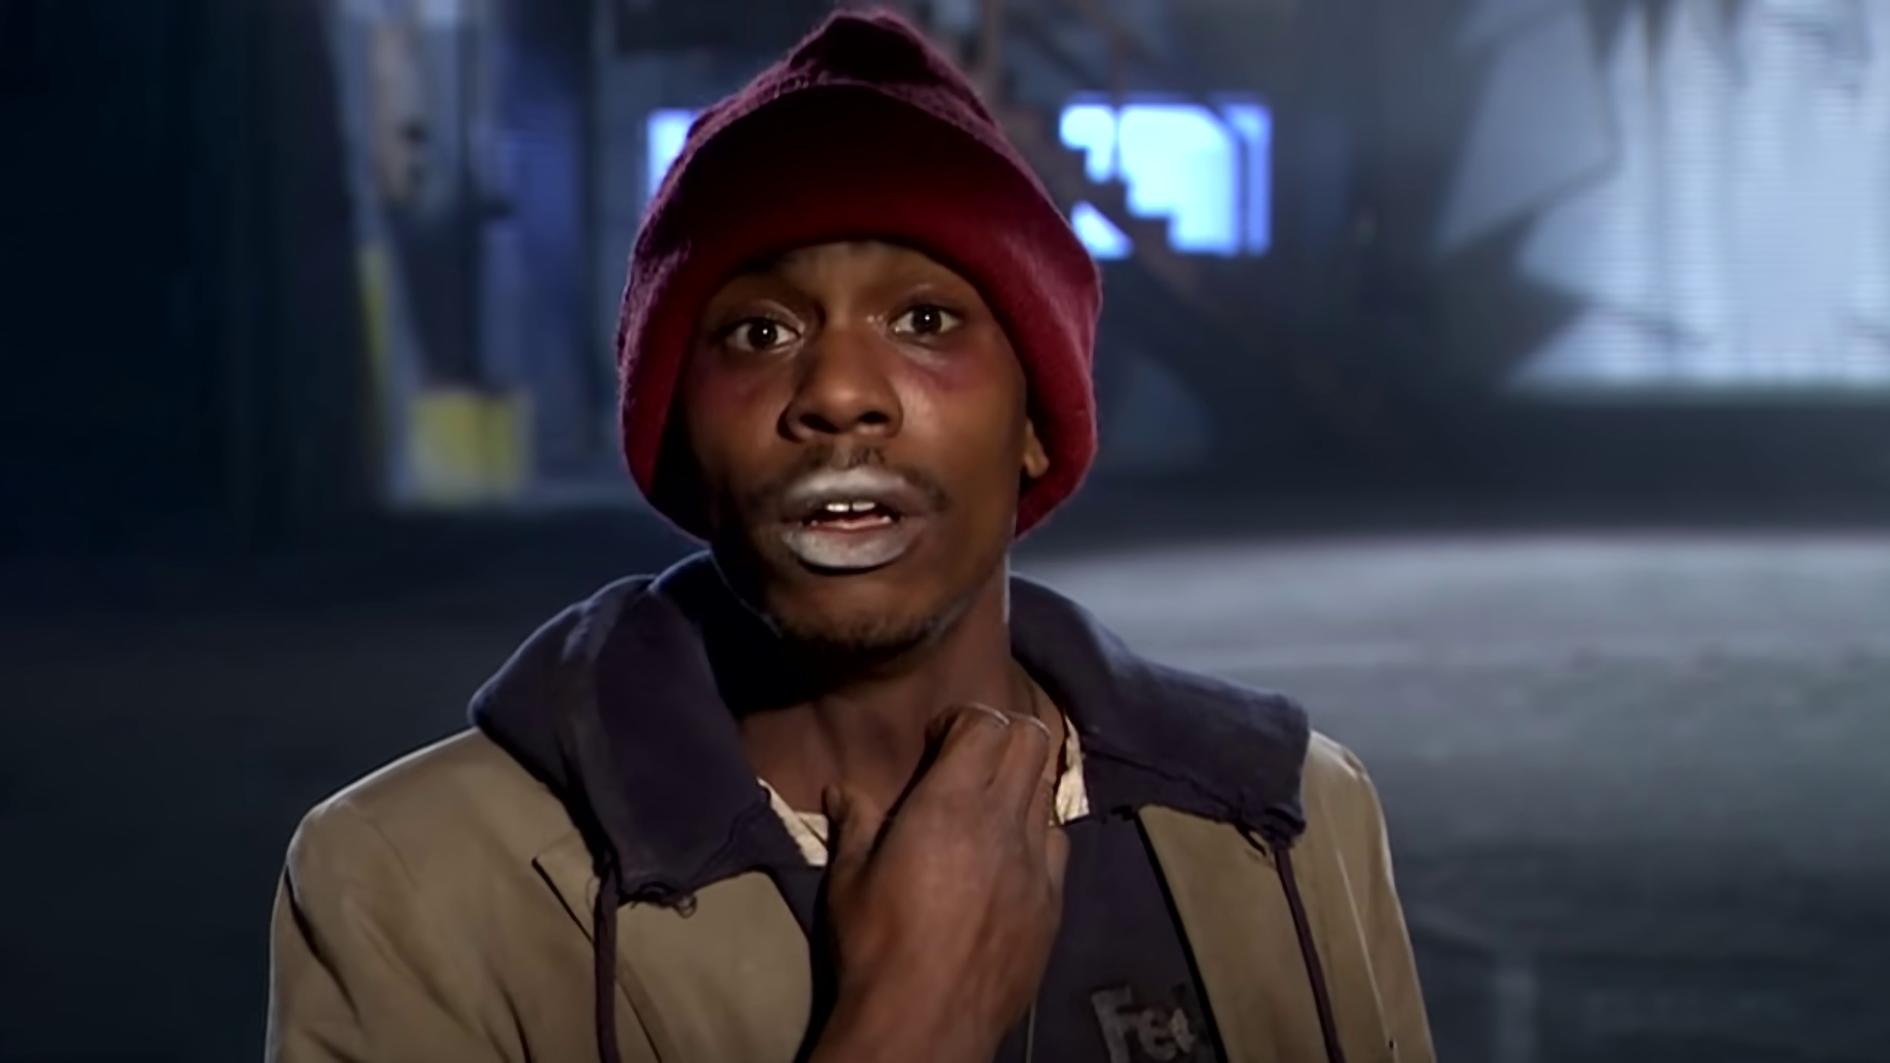 Dave Chappelle as Tyrone Biggums the Crackhead HD Widescreen Blank Meme Template